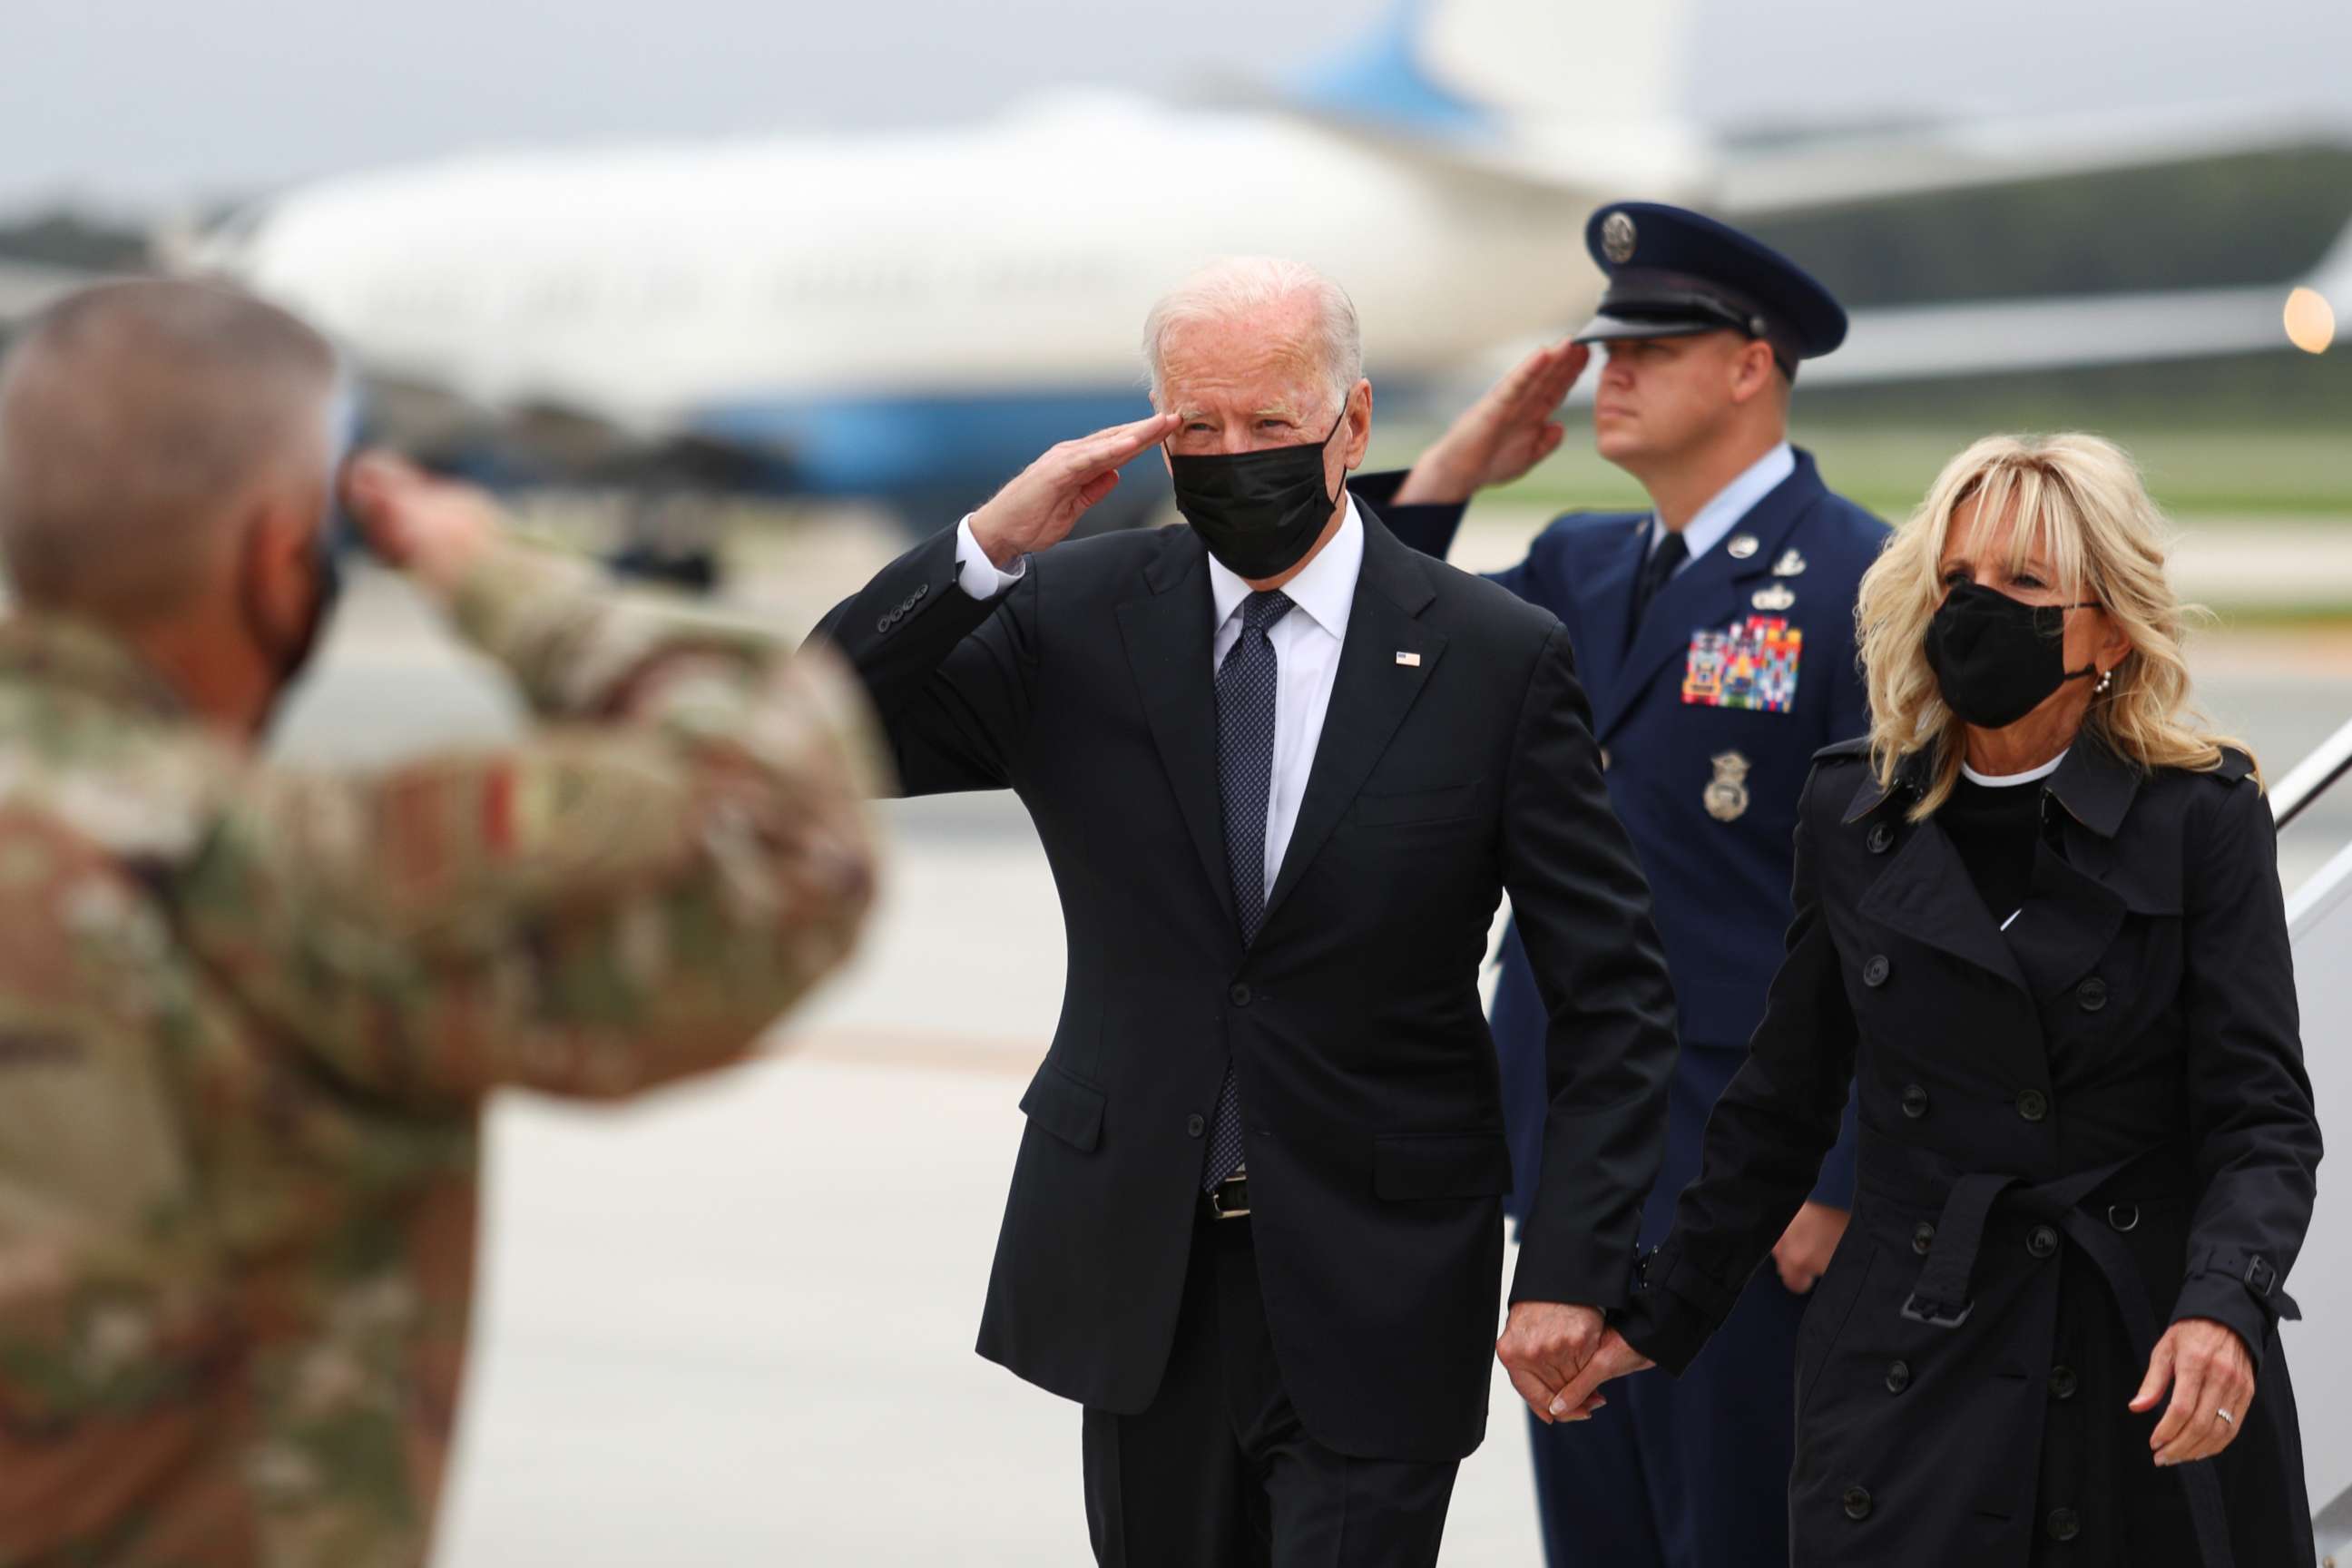 PHOTO: President Joe Biden and first lady Jill Biden arrive at Dover Air Force Base in Dover, Delaware, Aug. 29, 2021.